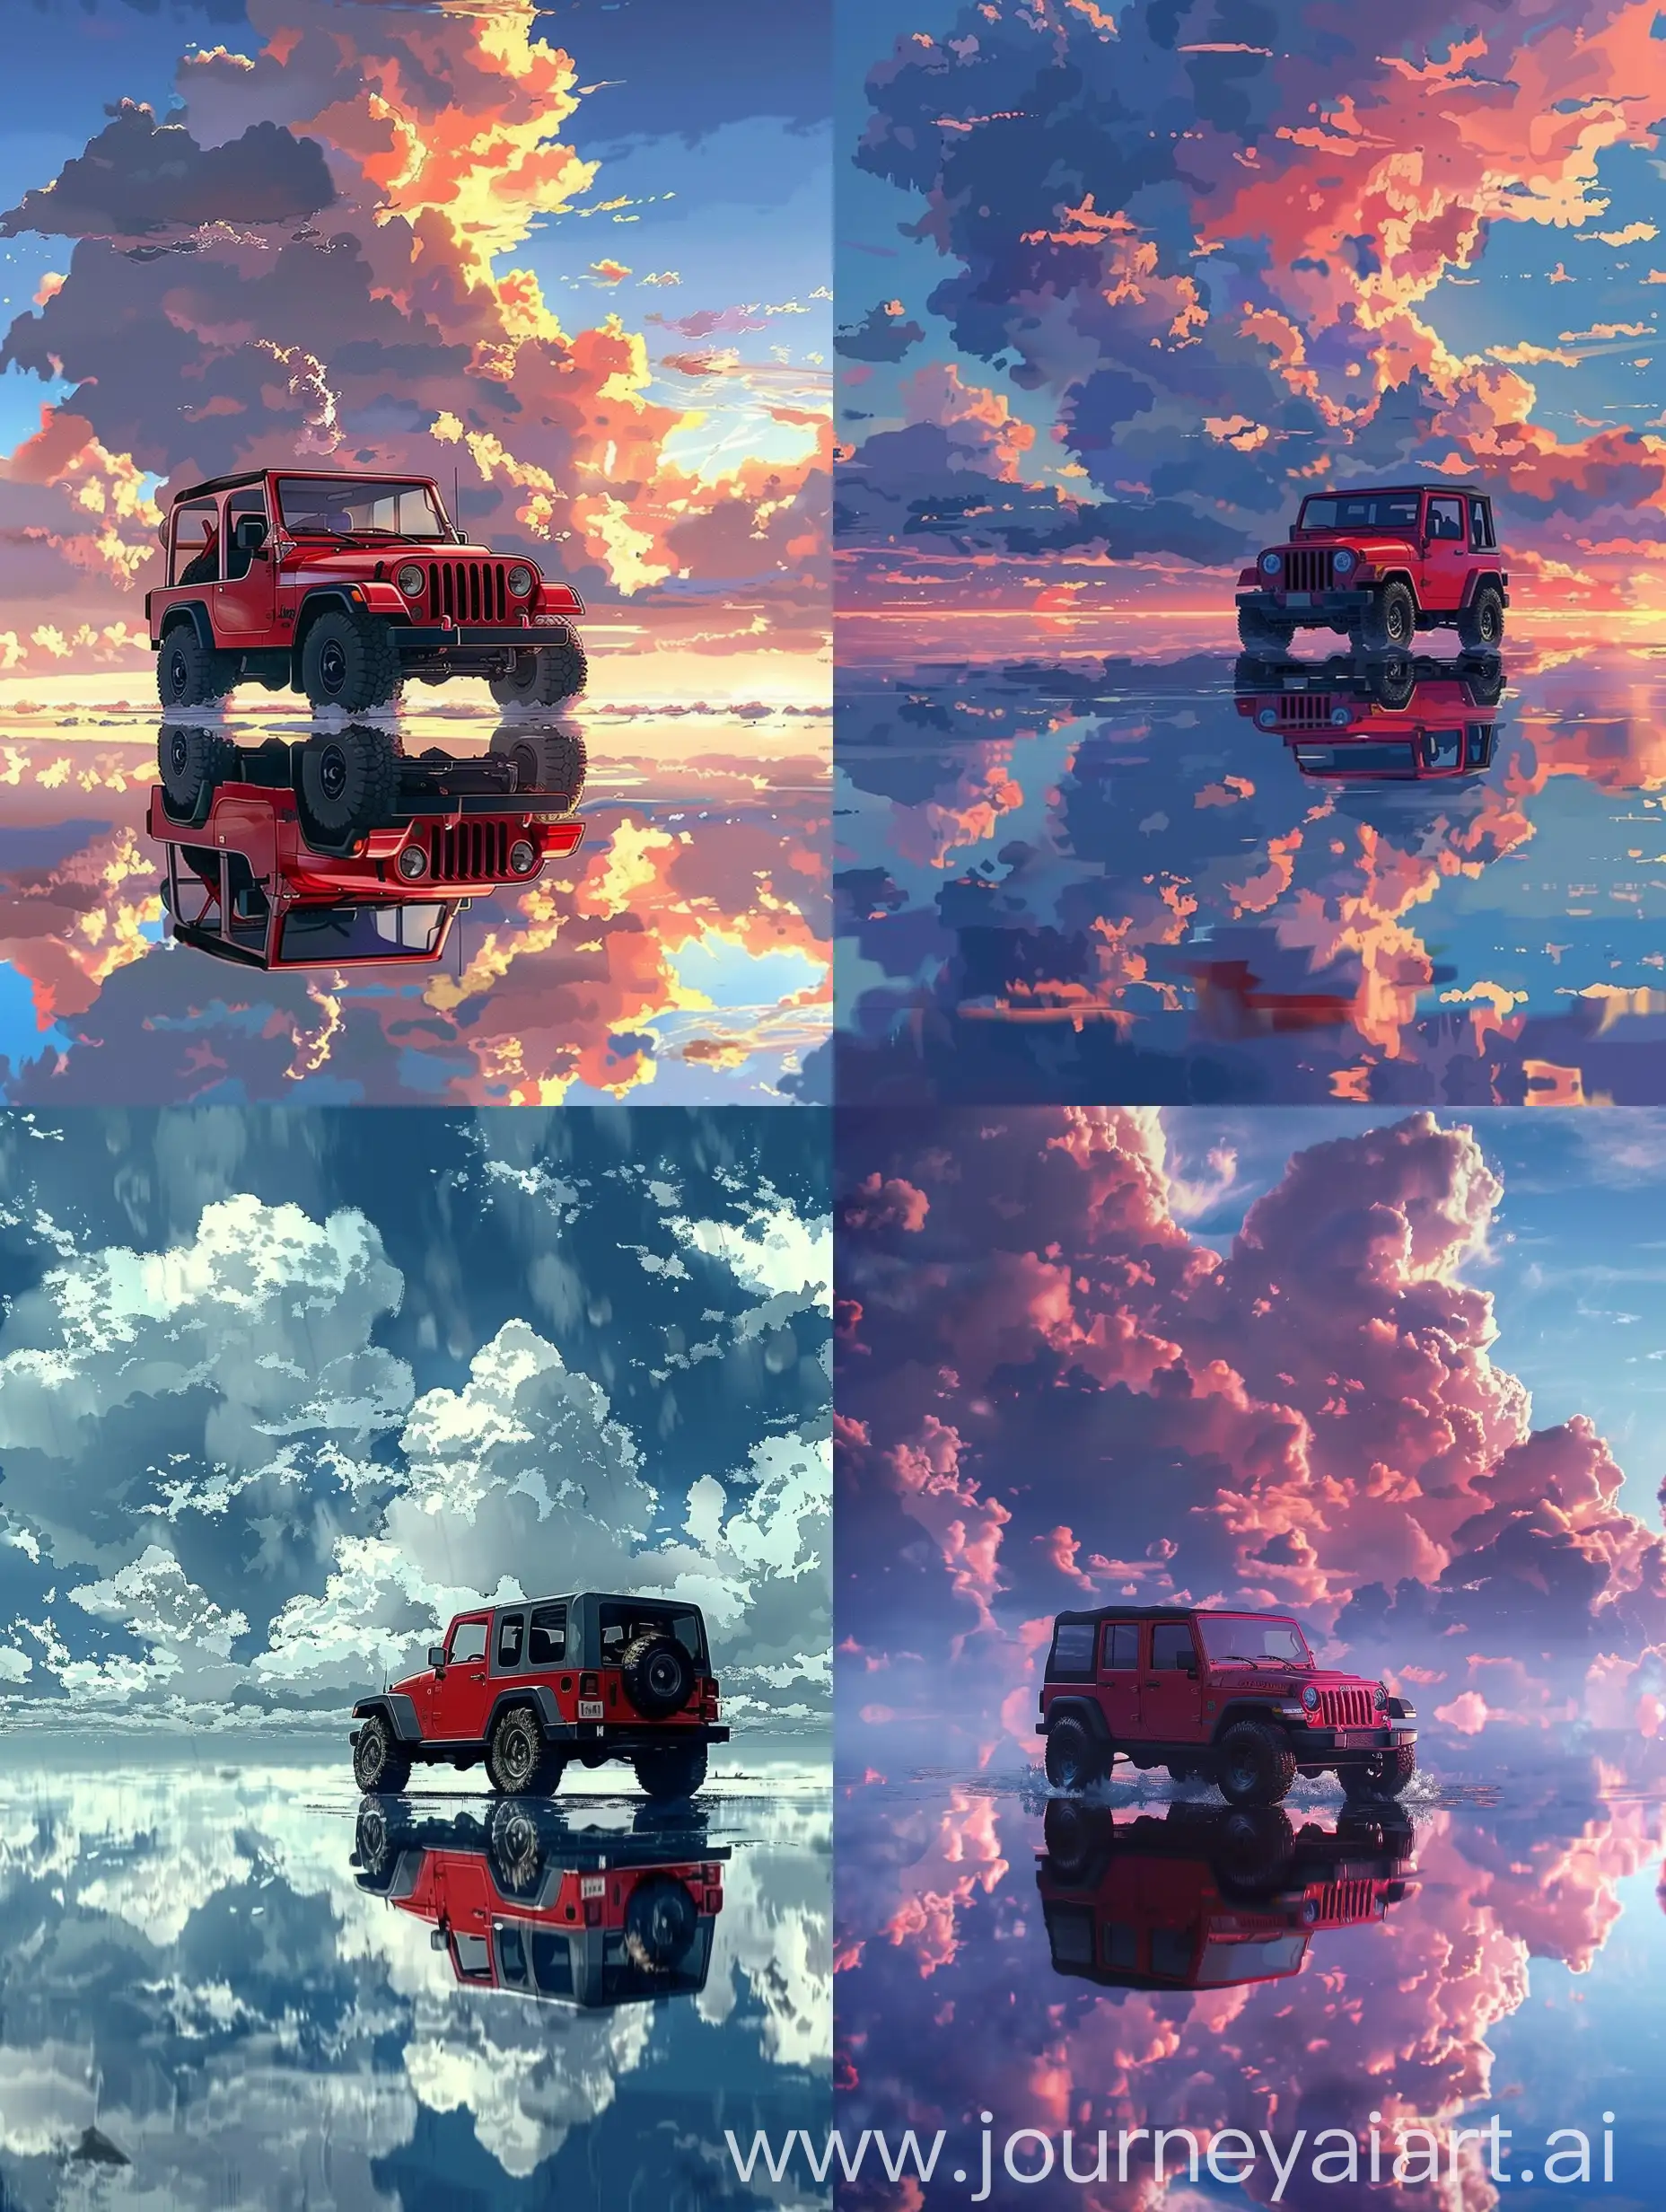 Colorful-Anime-Sky-with-Puffy-Clouds-and-Red-Jeep-Reflection